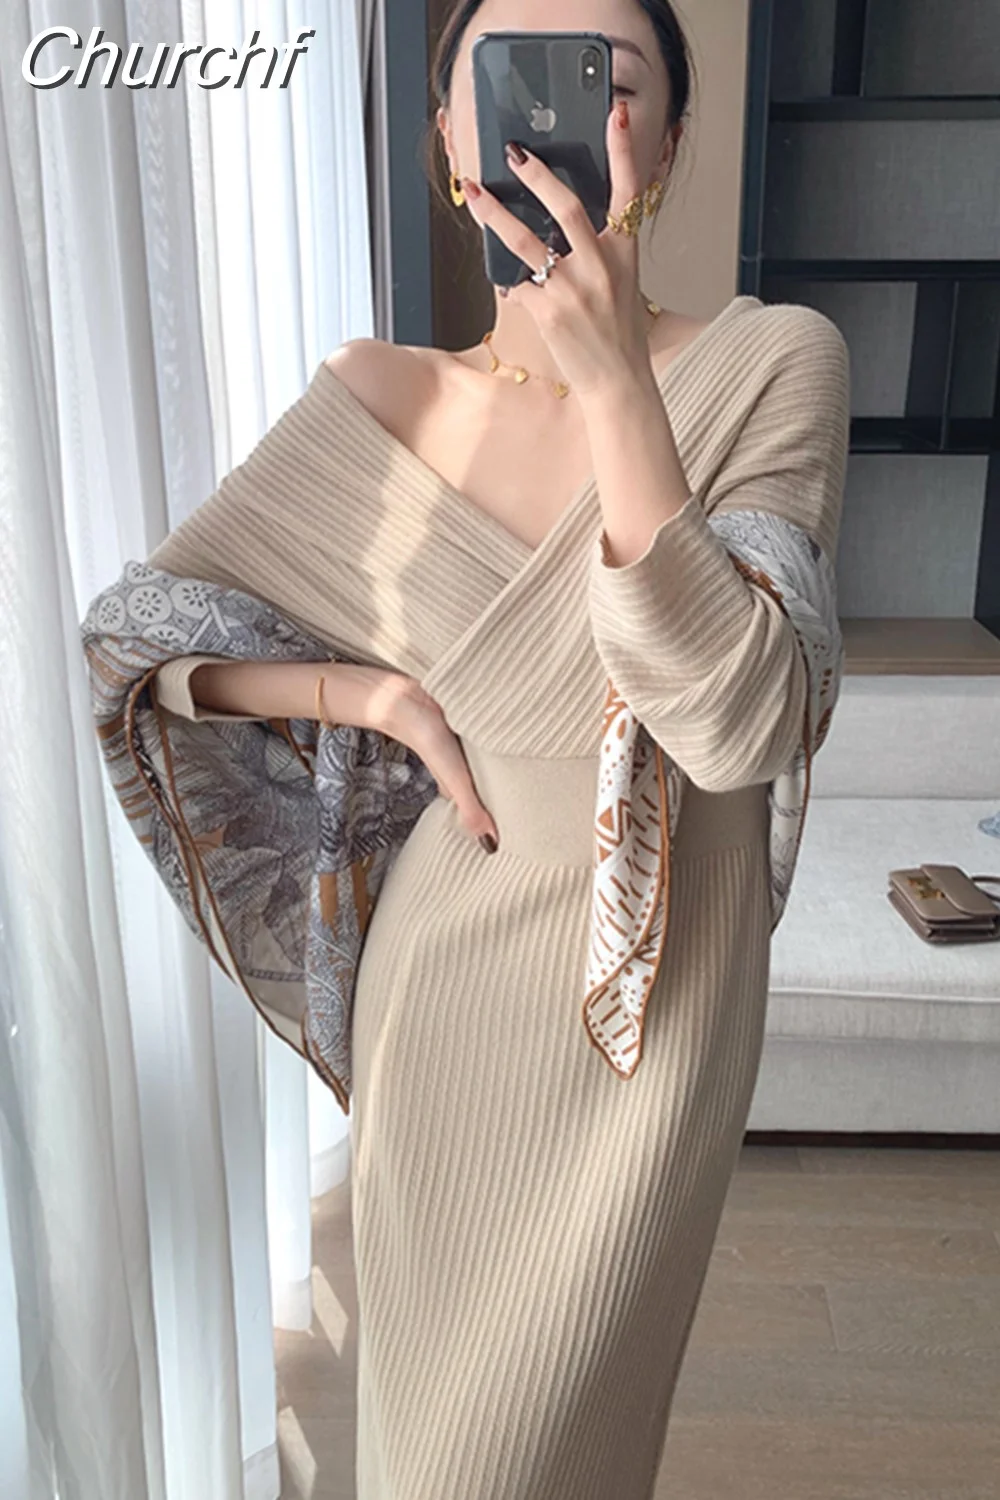 Churchf Sleeve V-Neck Sweater Sexy Backless Knitted Midi Dress Women Elegant Female Slim Evening Party Prom Clothes Autumn 2023